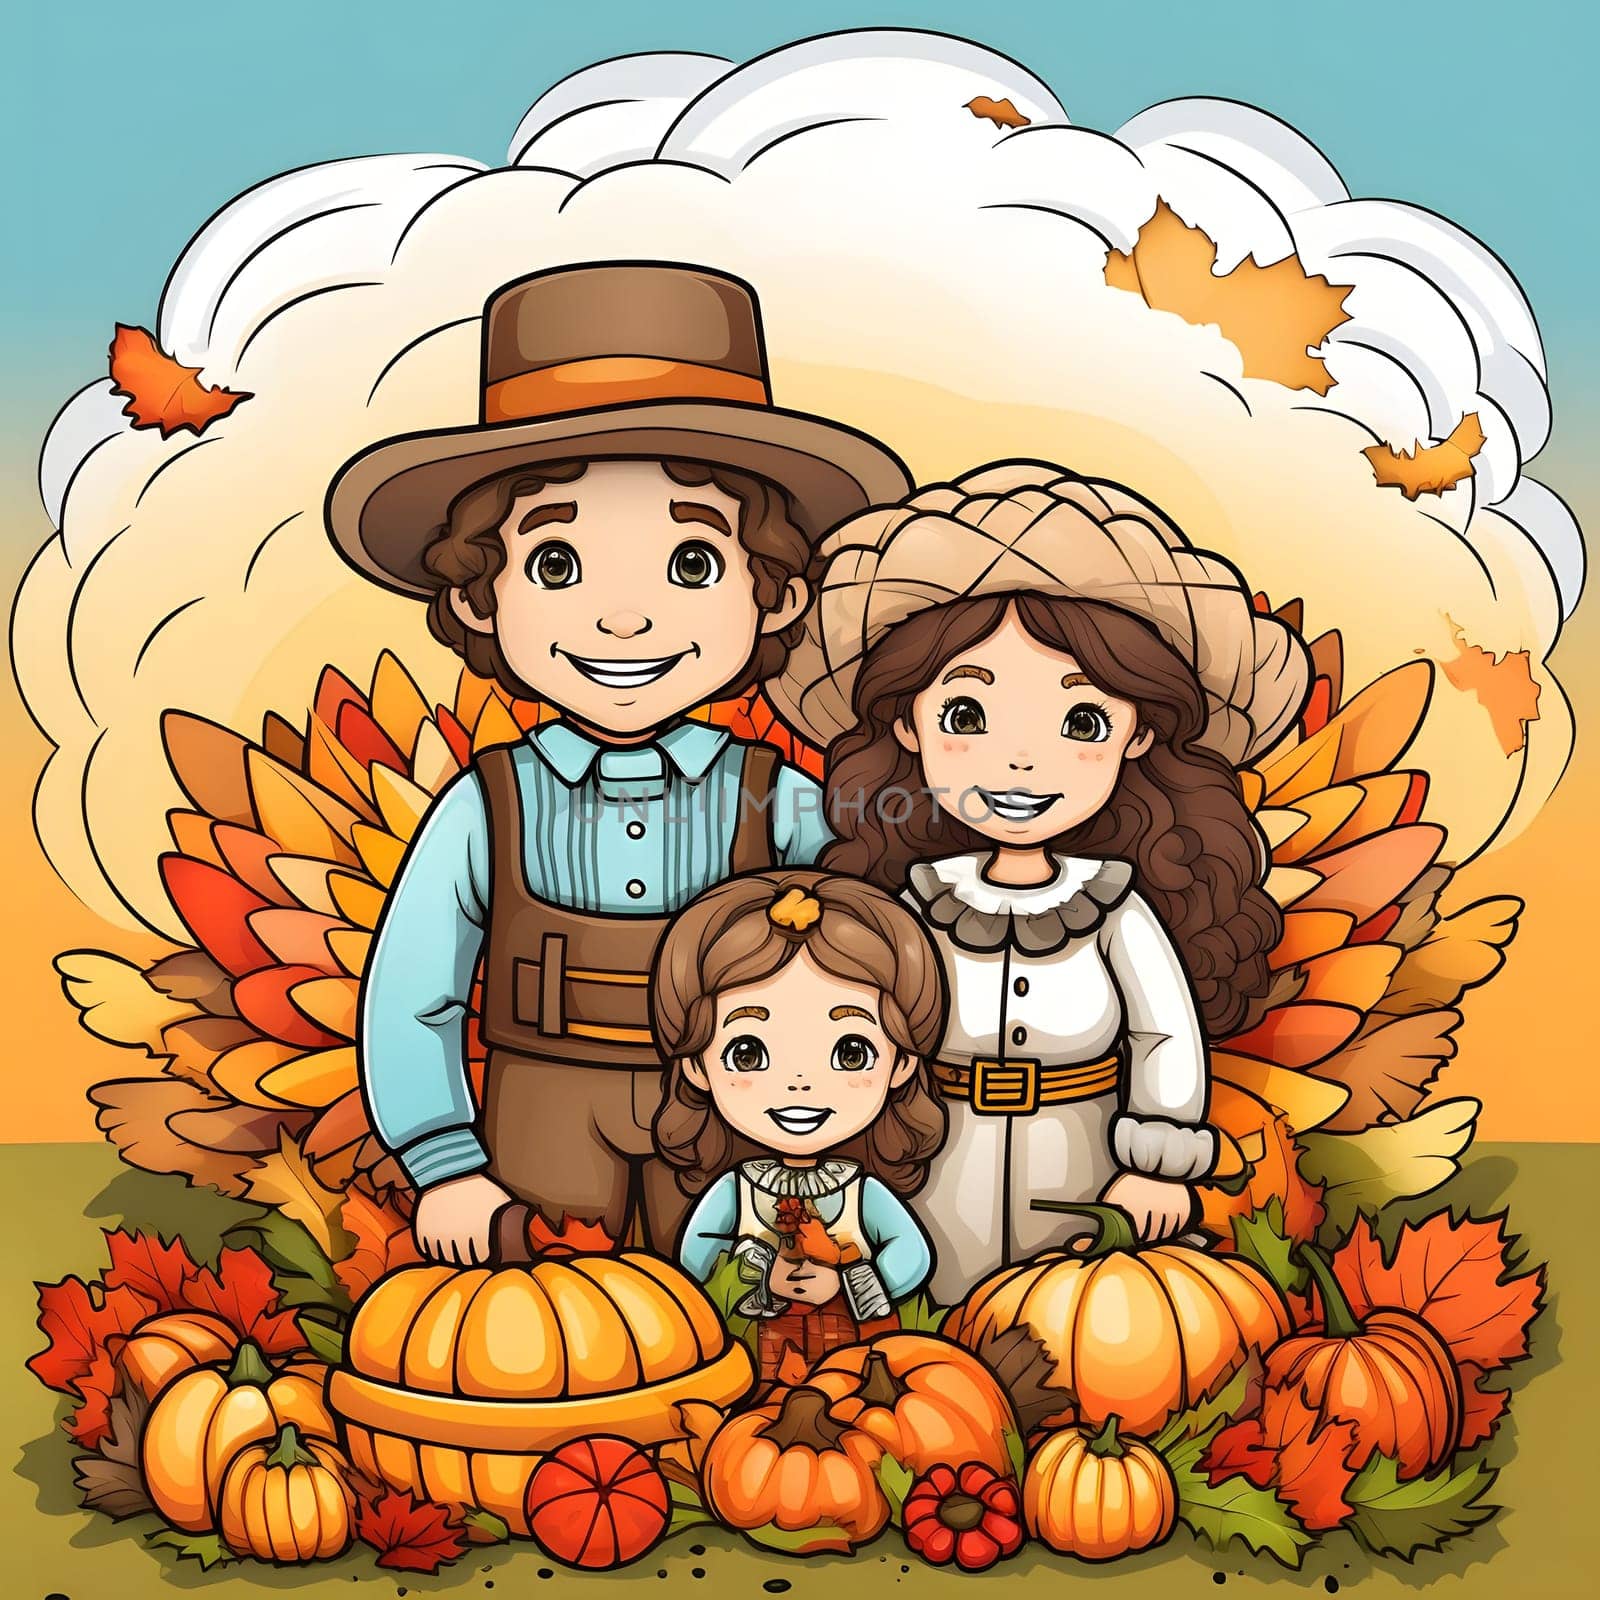 Illustrated happy family around pumpkins. Pumpkin as a dish of thanksgiving for the harvest. An atmosphere of joy and celebration.